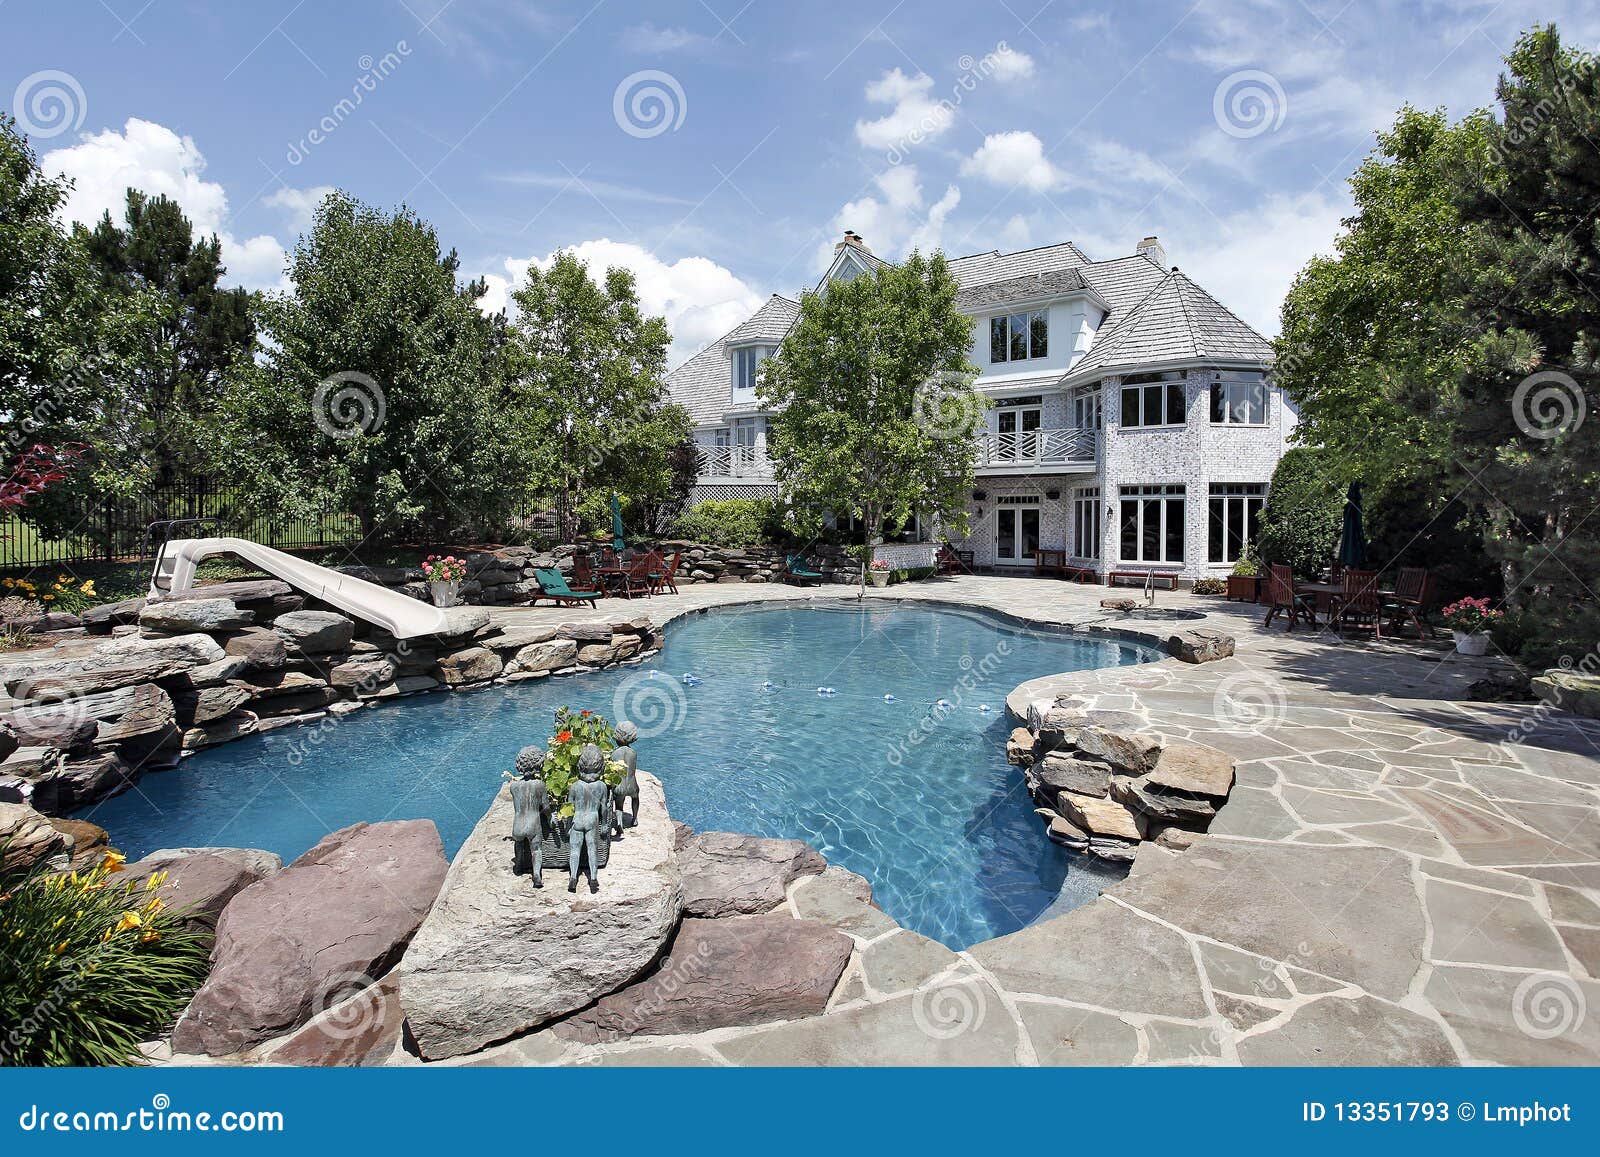 luxury home with swimming pool